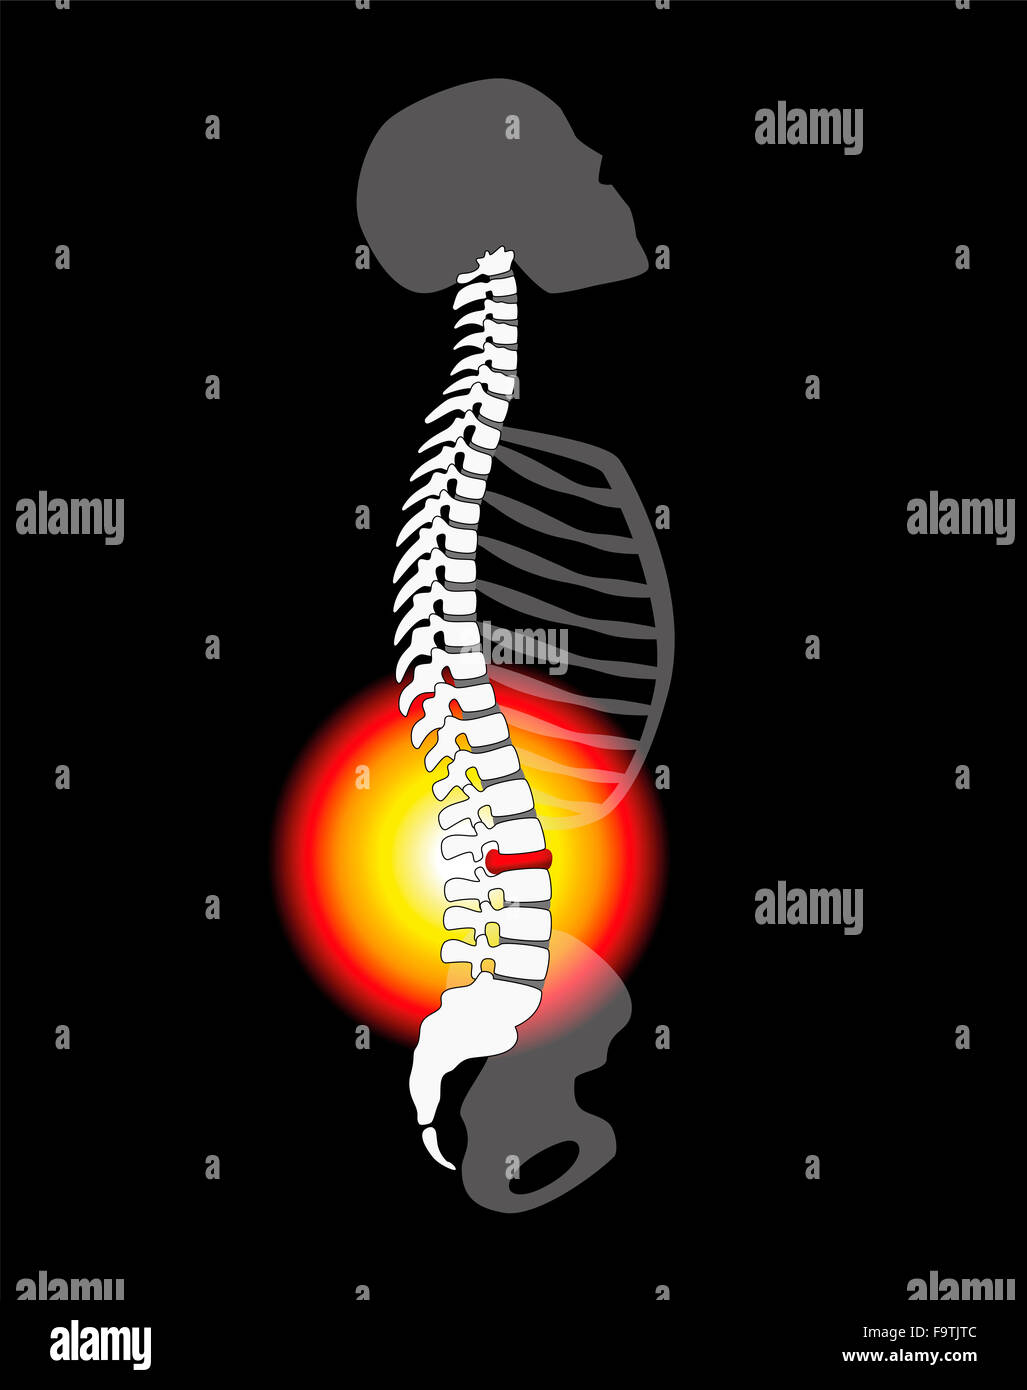 Back pain - spinal disc herniation or prolapse at a human vertebral column - profile view. Stock Photo